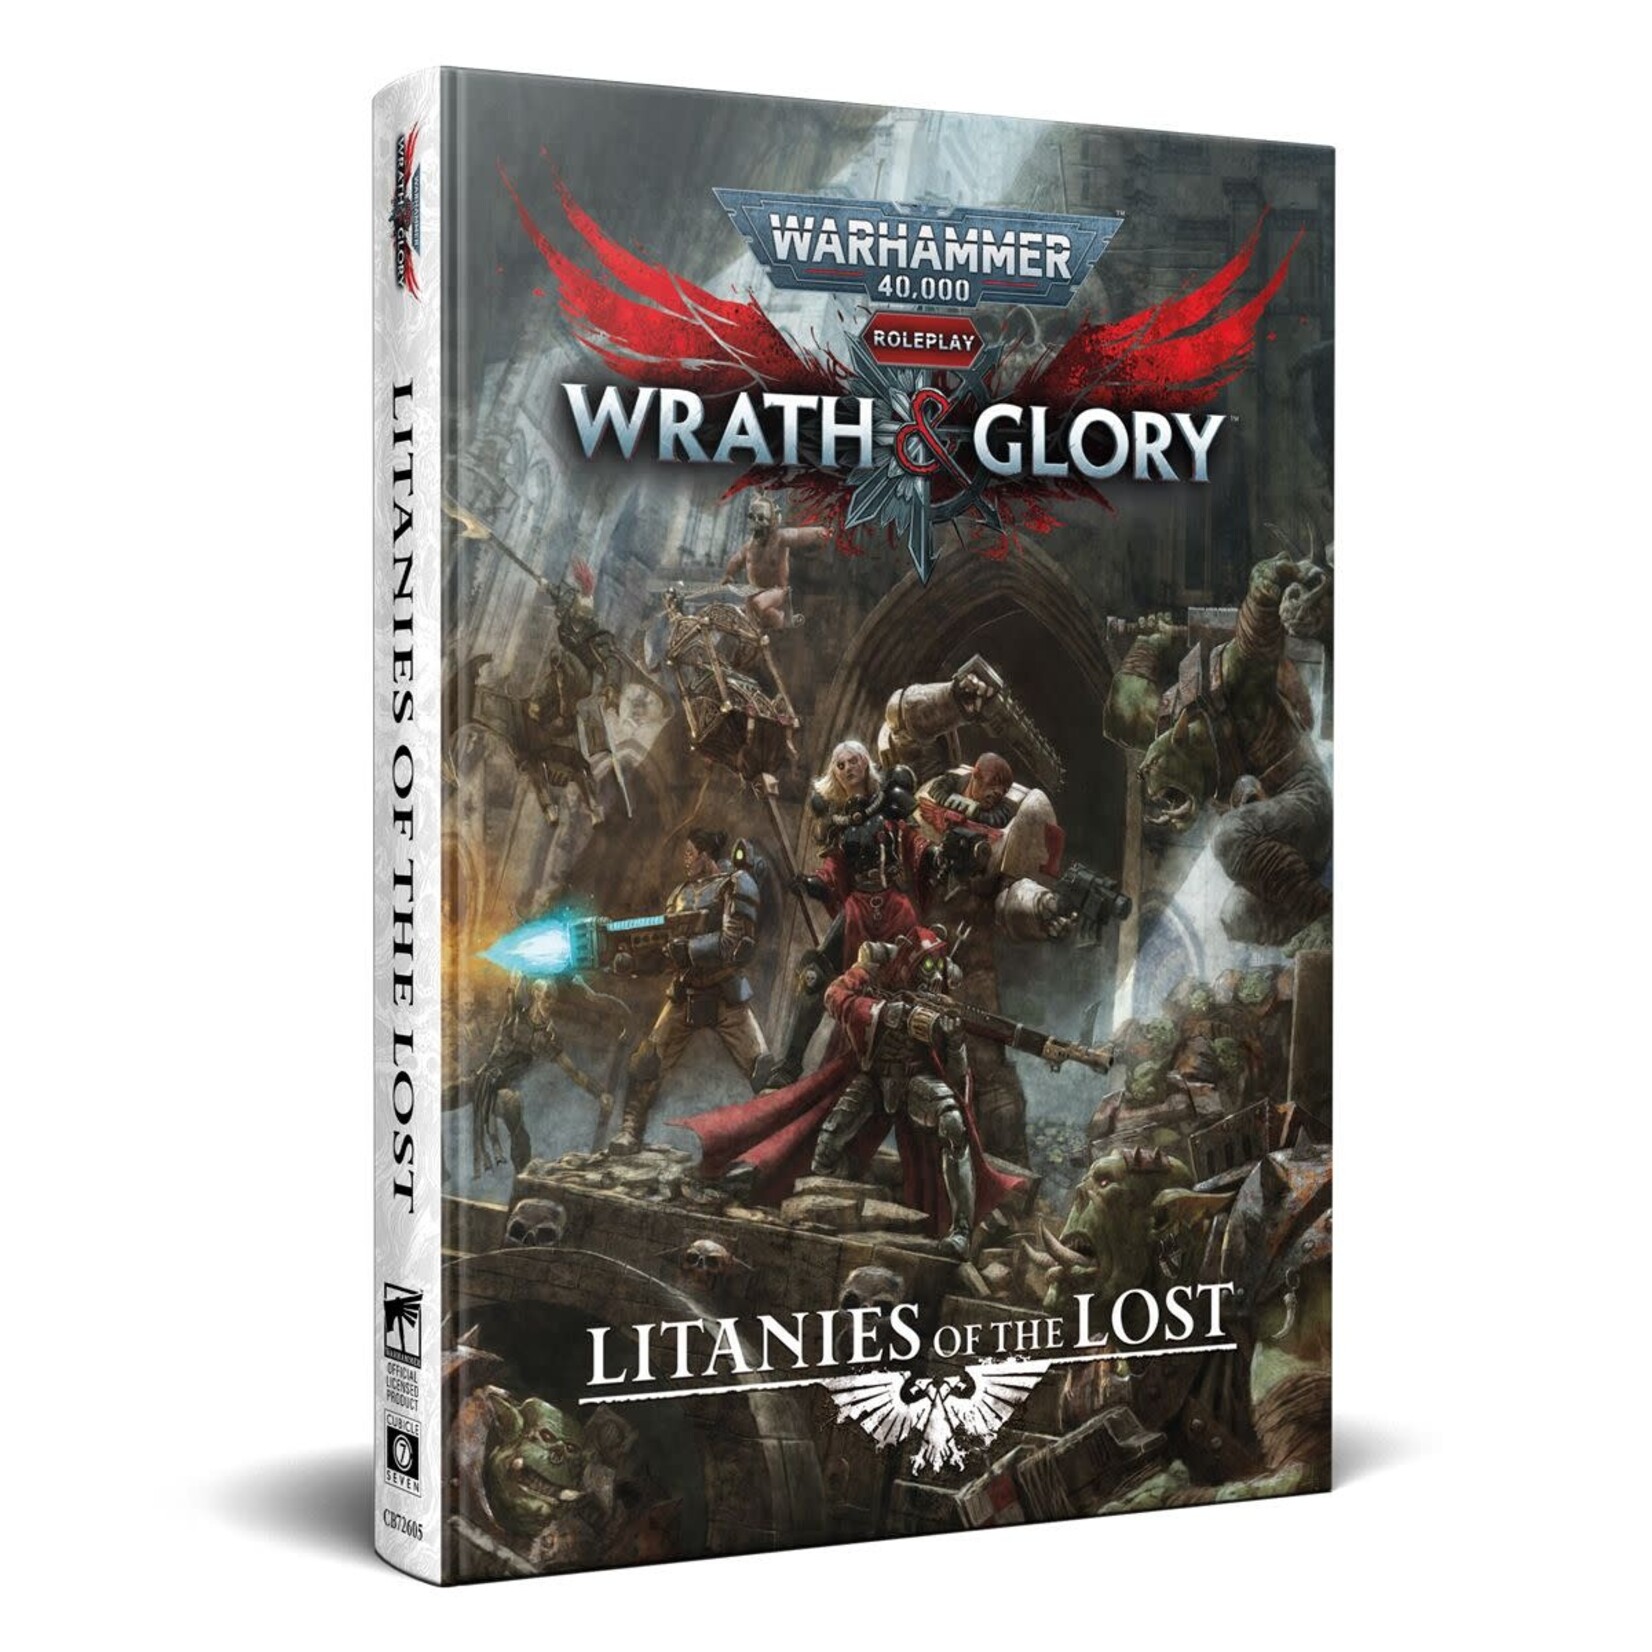 Warhammer 40k RPG: Wrath and Glory - Litanies of the Lost